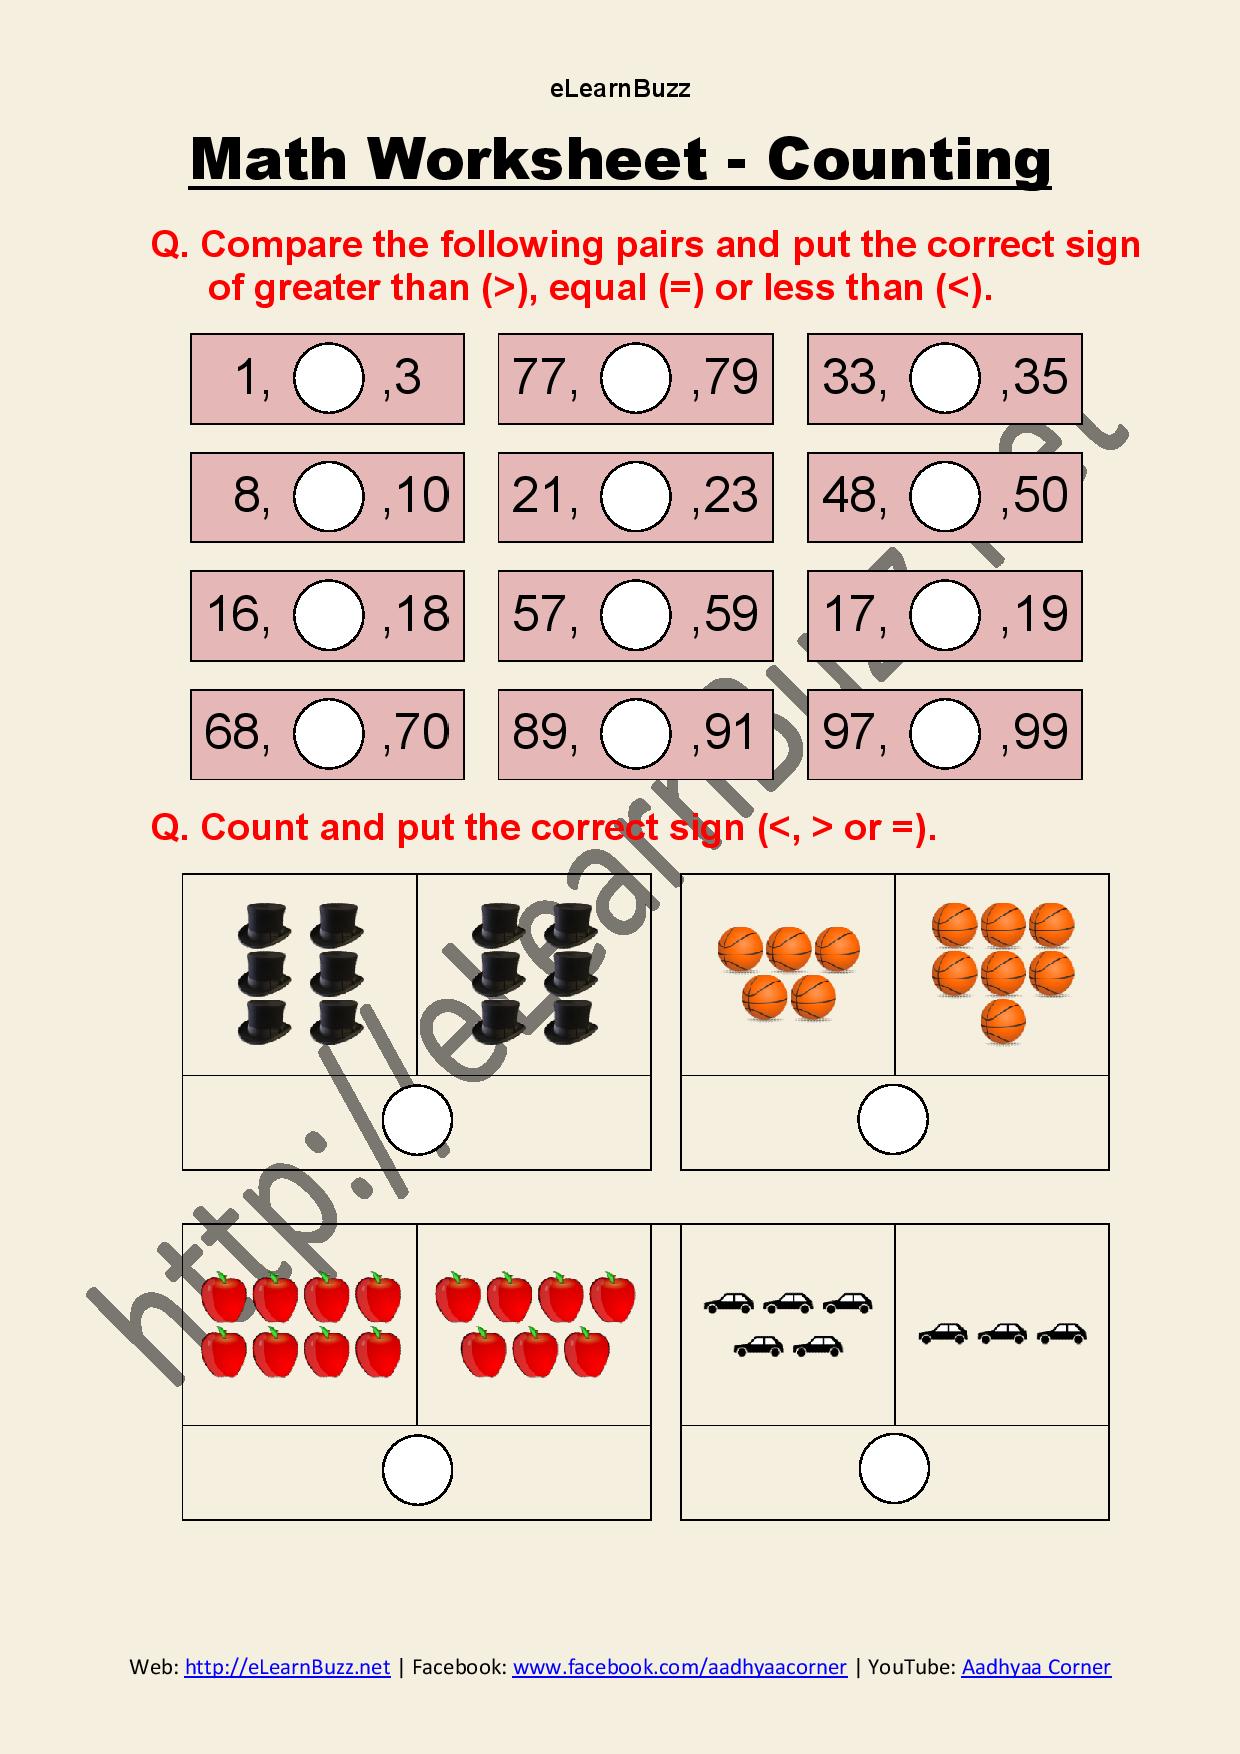 counting worksheet for class 1 and ukg math elearnbuzz